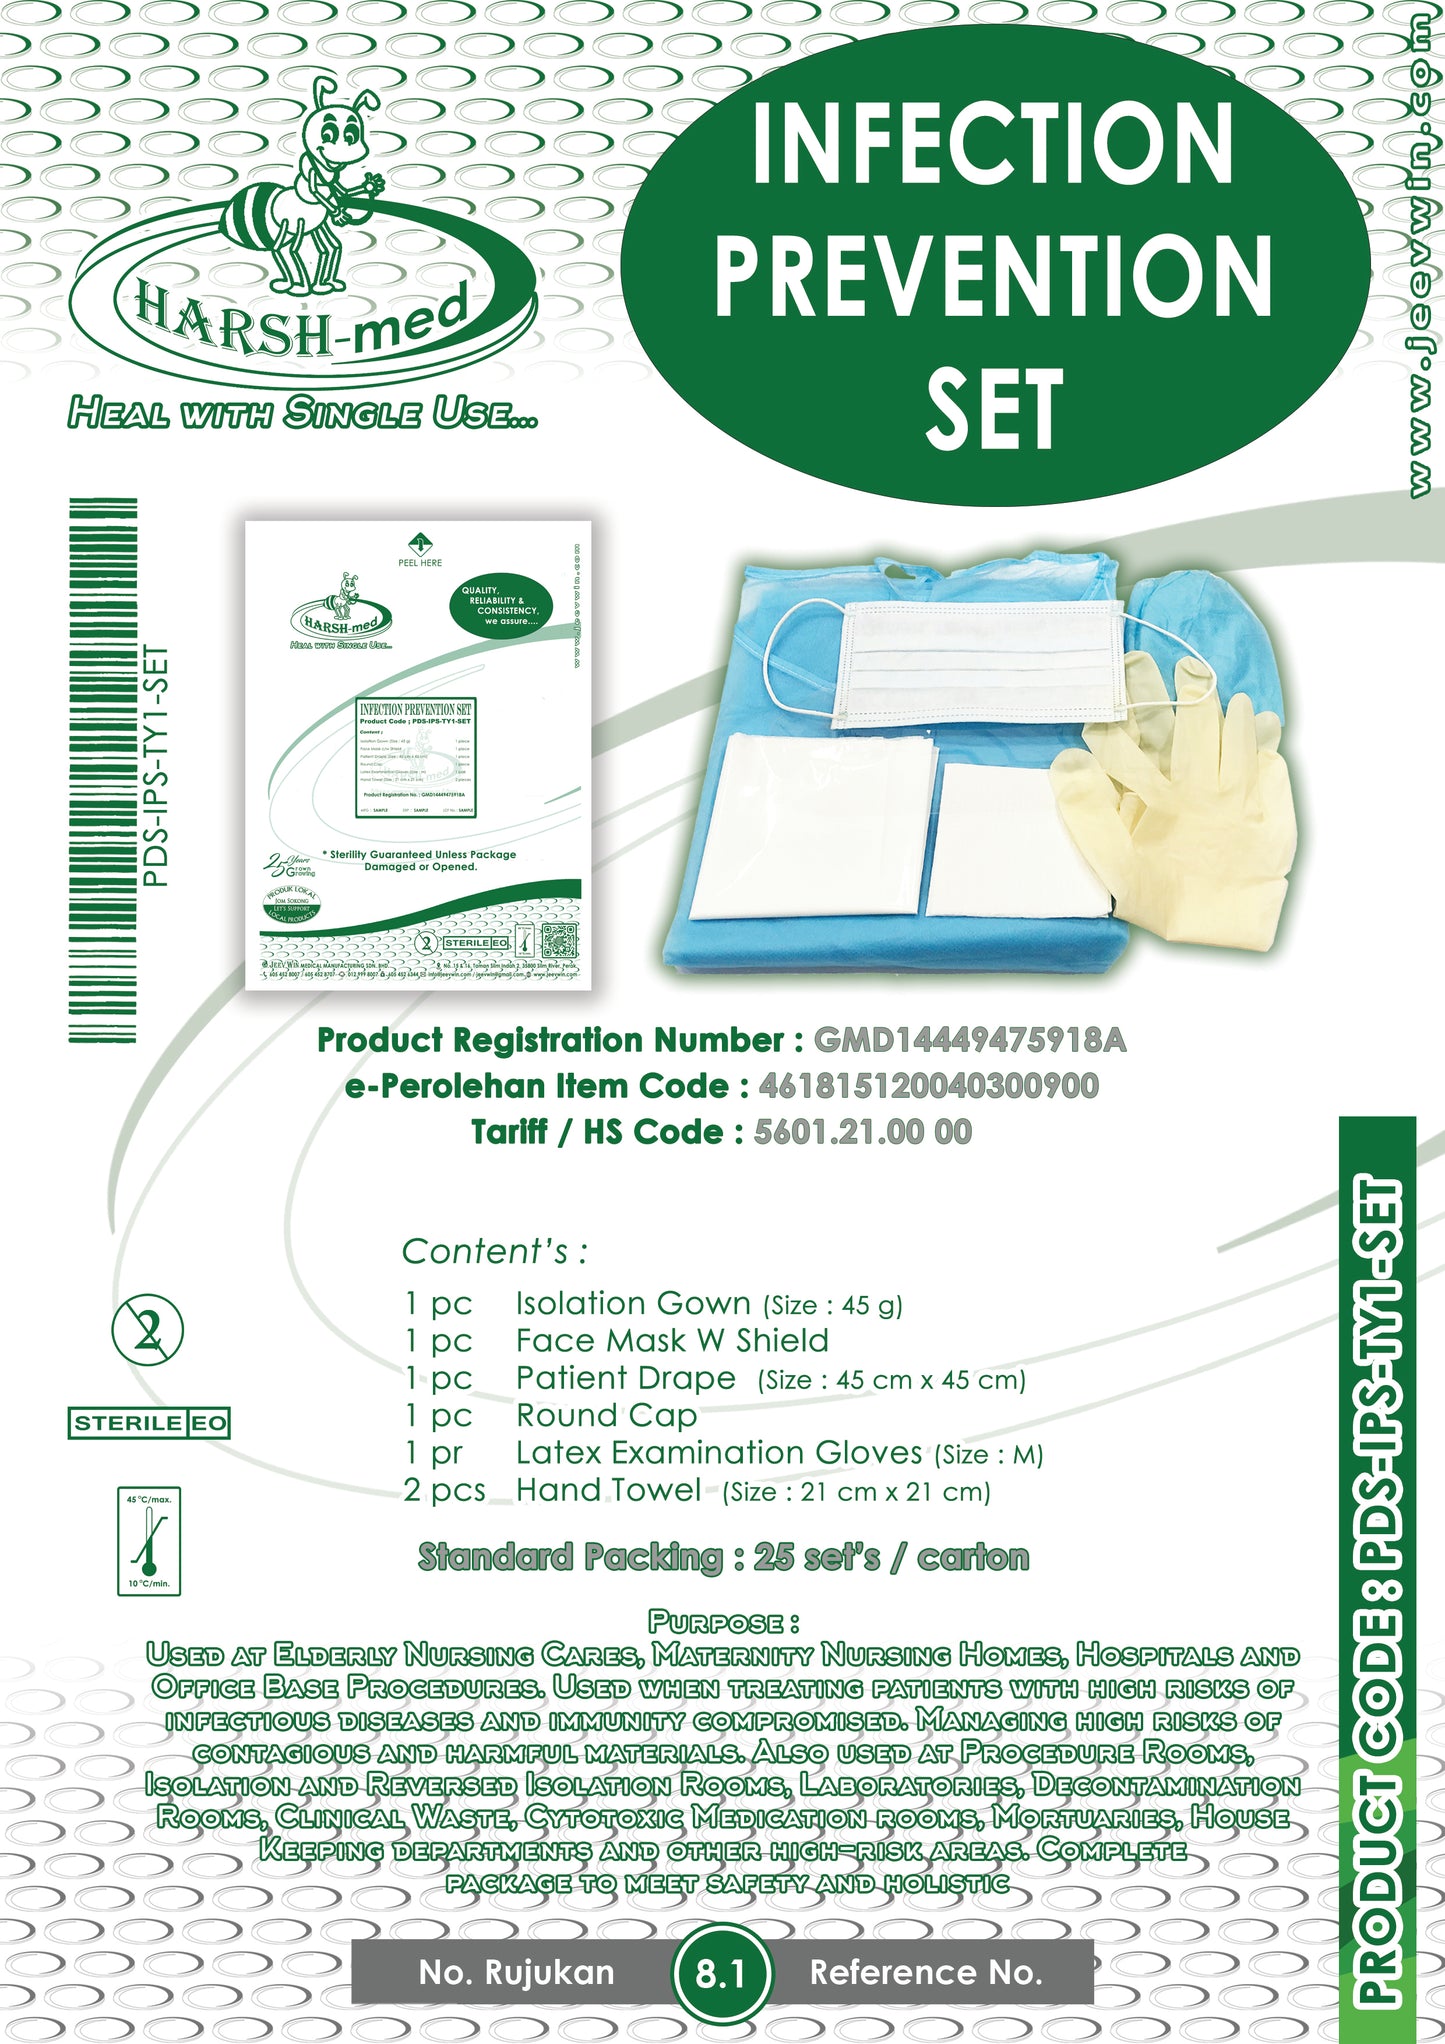 INFECTION PREVENTION SET